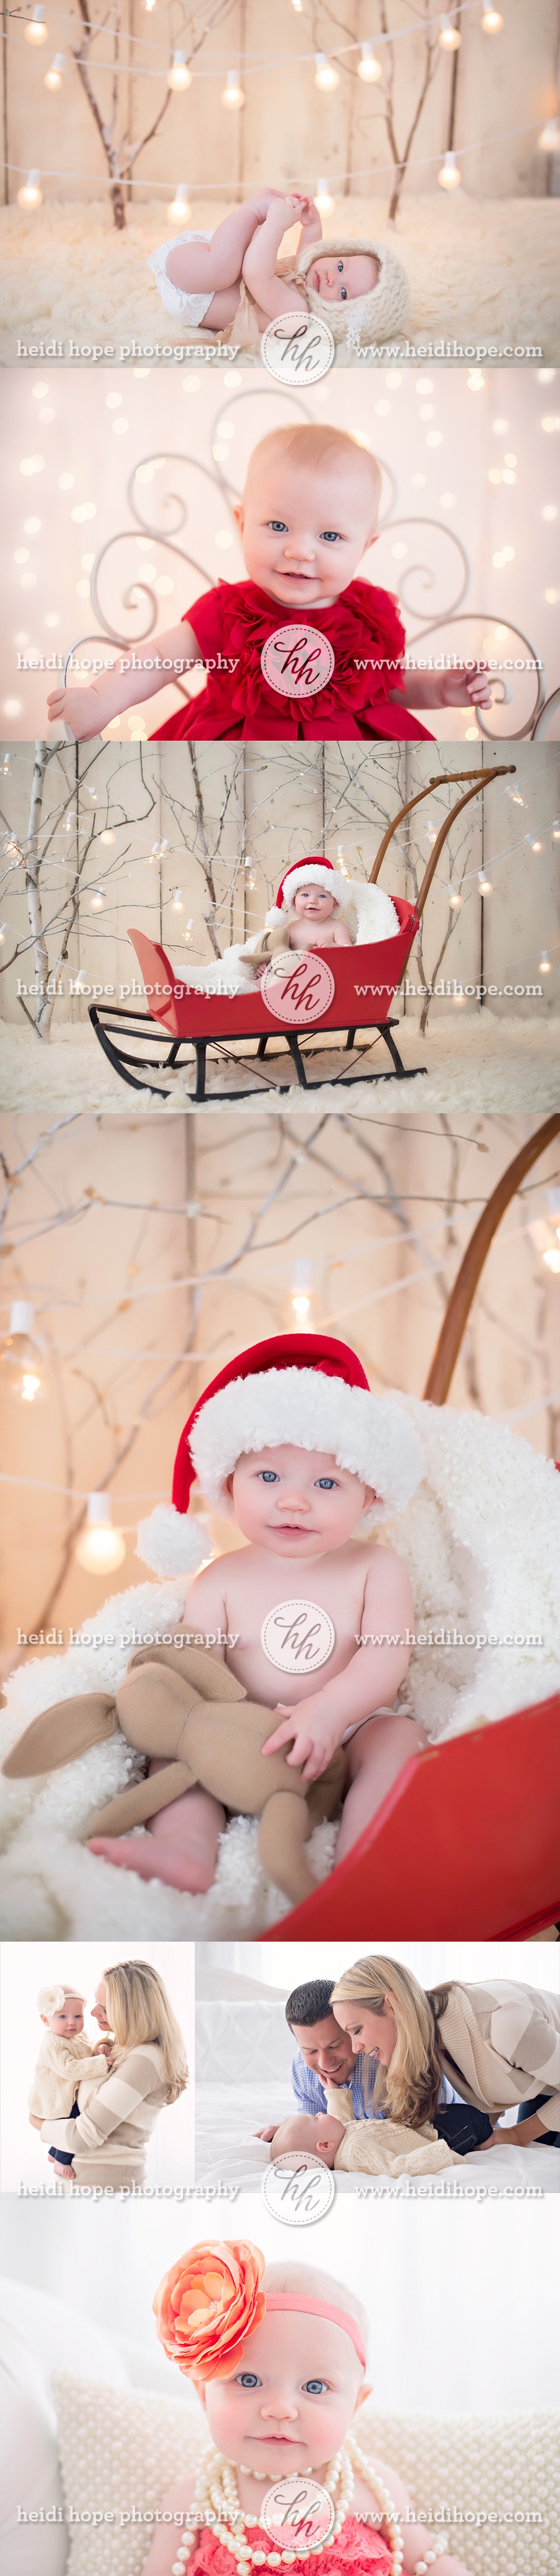 6 month old christmas family portrait session with lights and snow sled